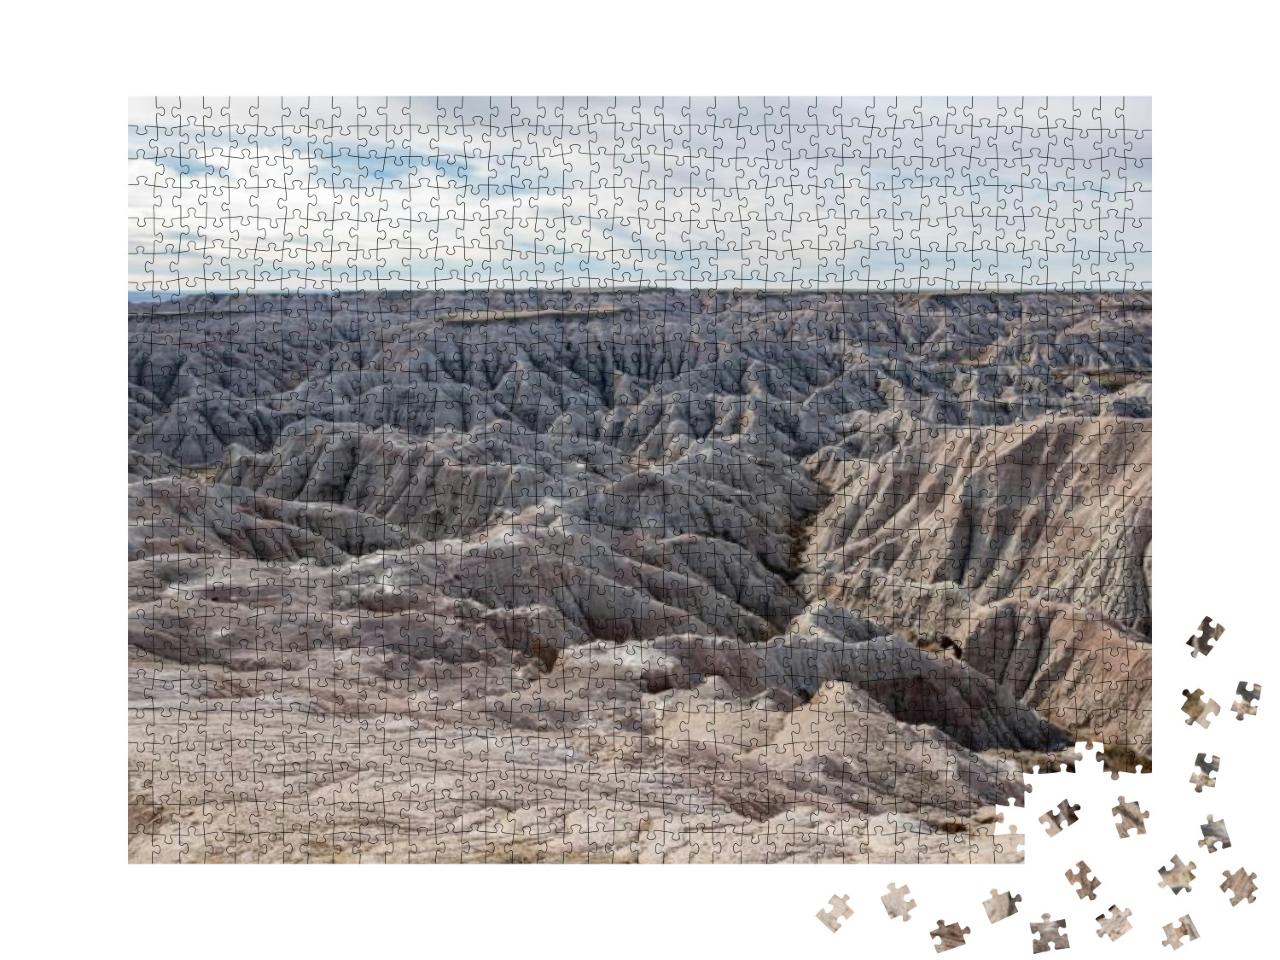 Badlands National Park on a Sunny Day in the State of Sou... Jigsaw Puzzle with 1000 pieces